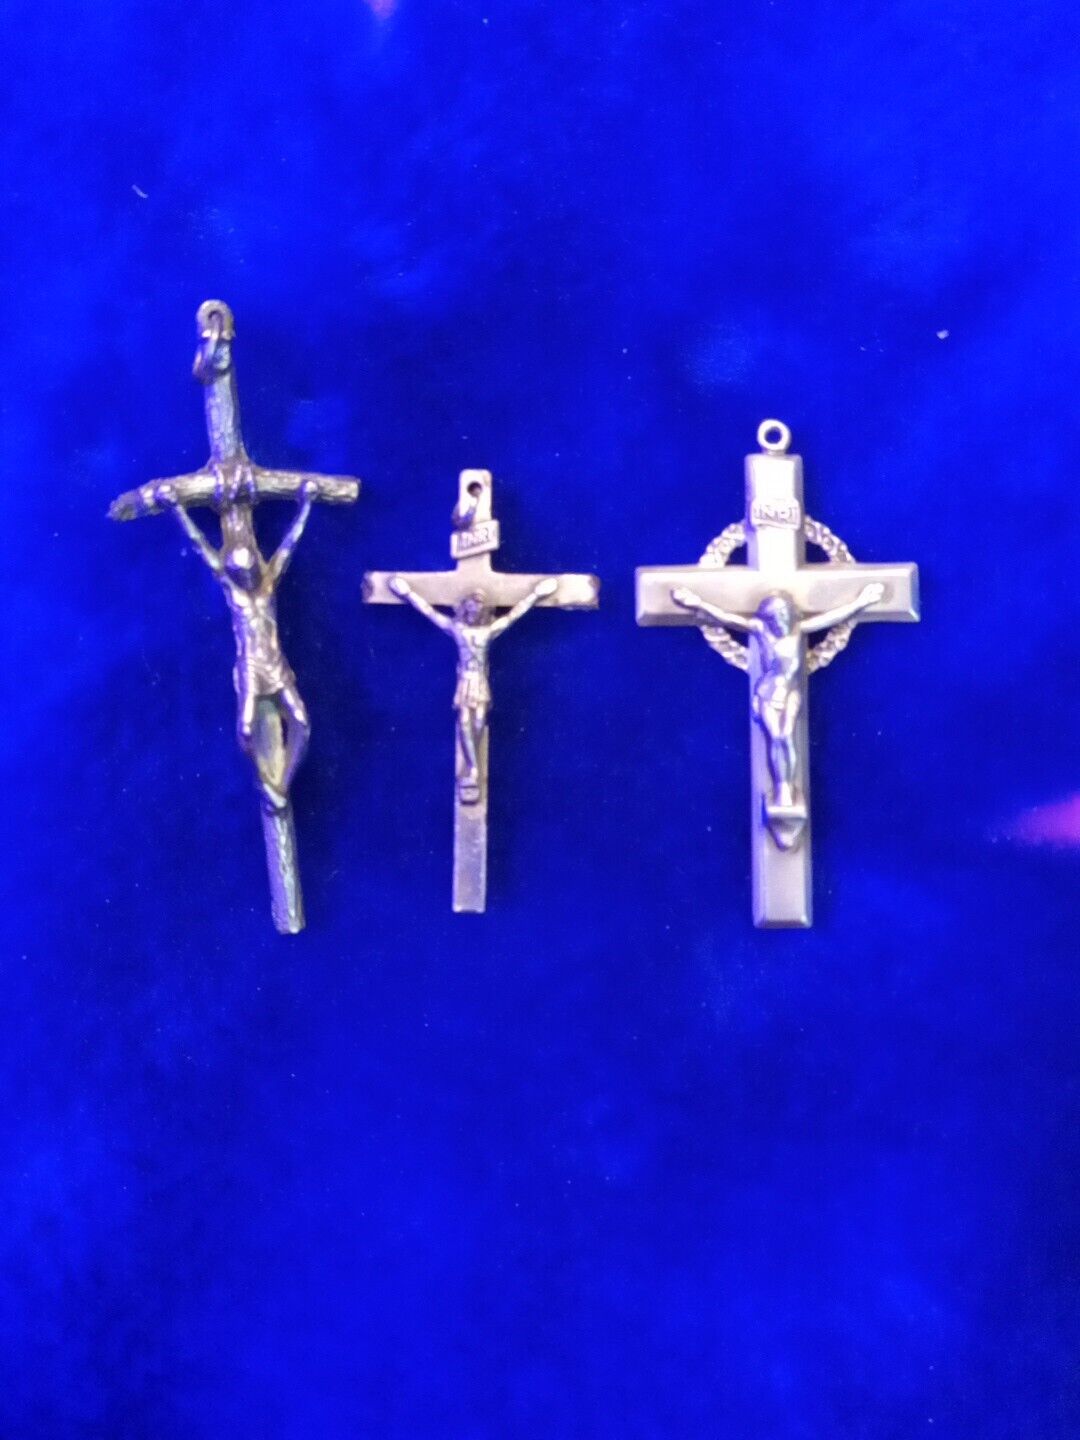 3 Vintage Italian Silver Crucifixes Found Medal Detecting At Former Convent.